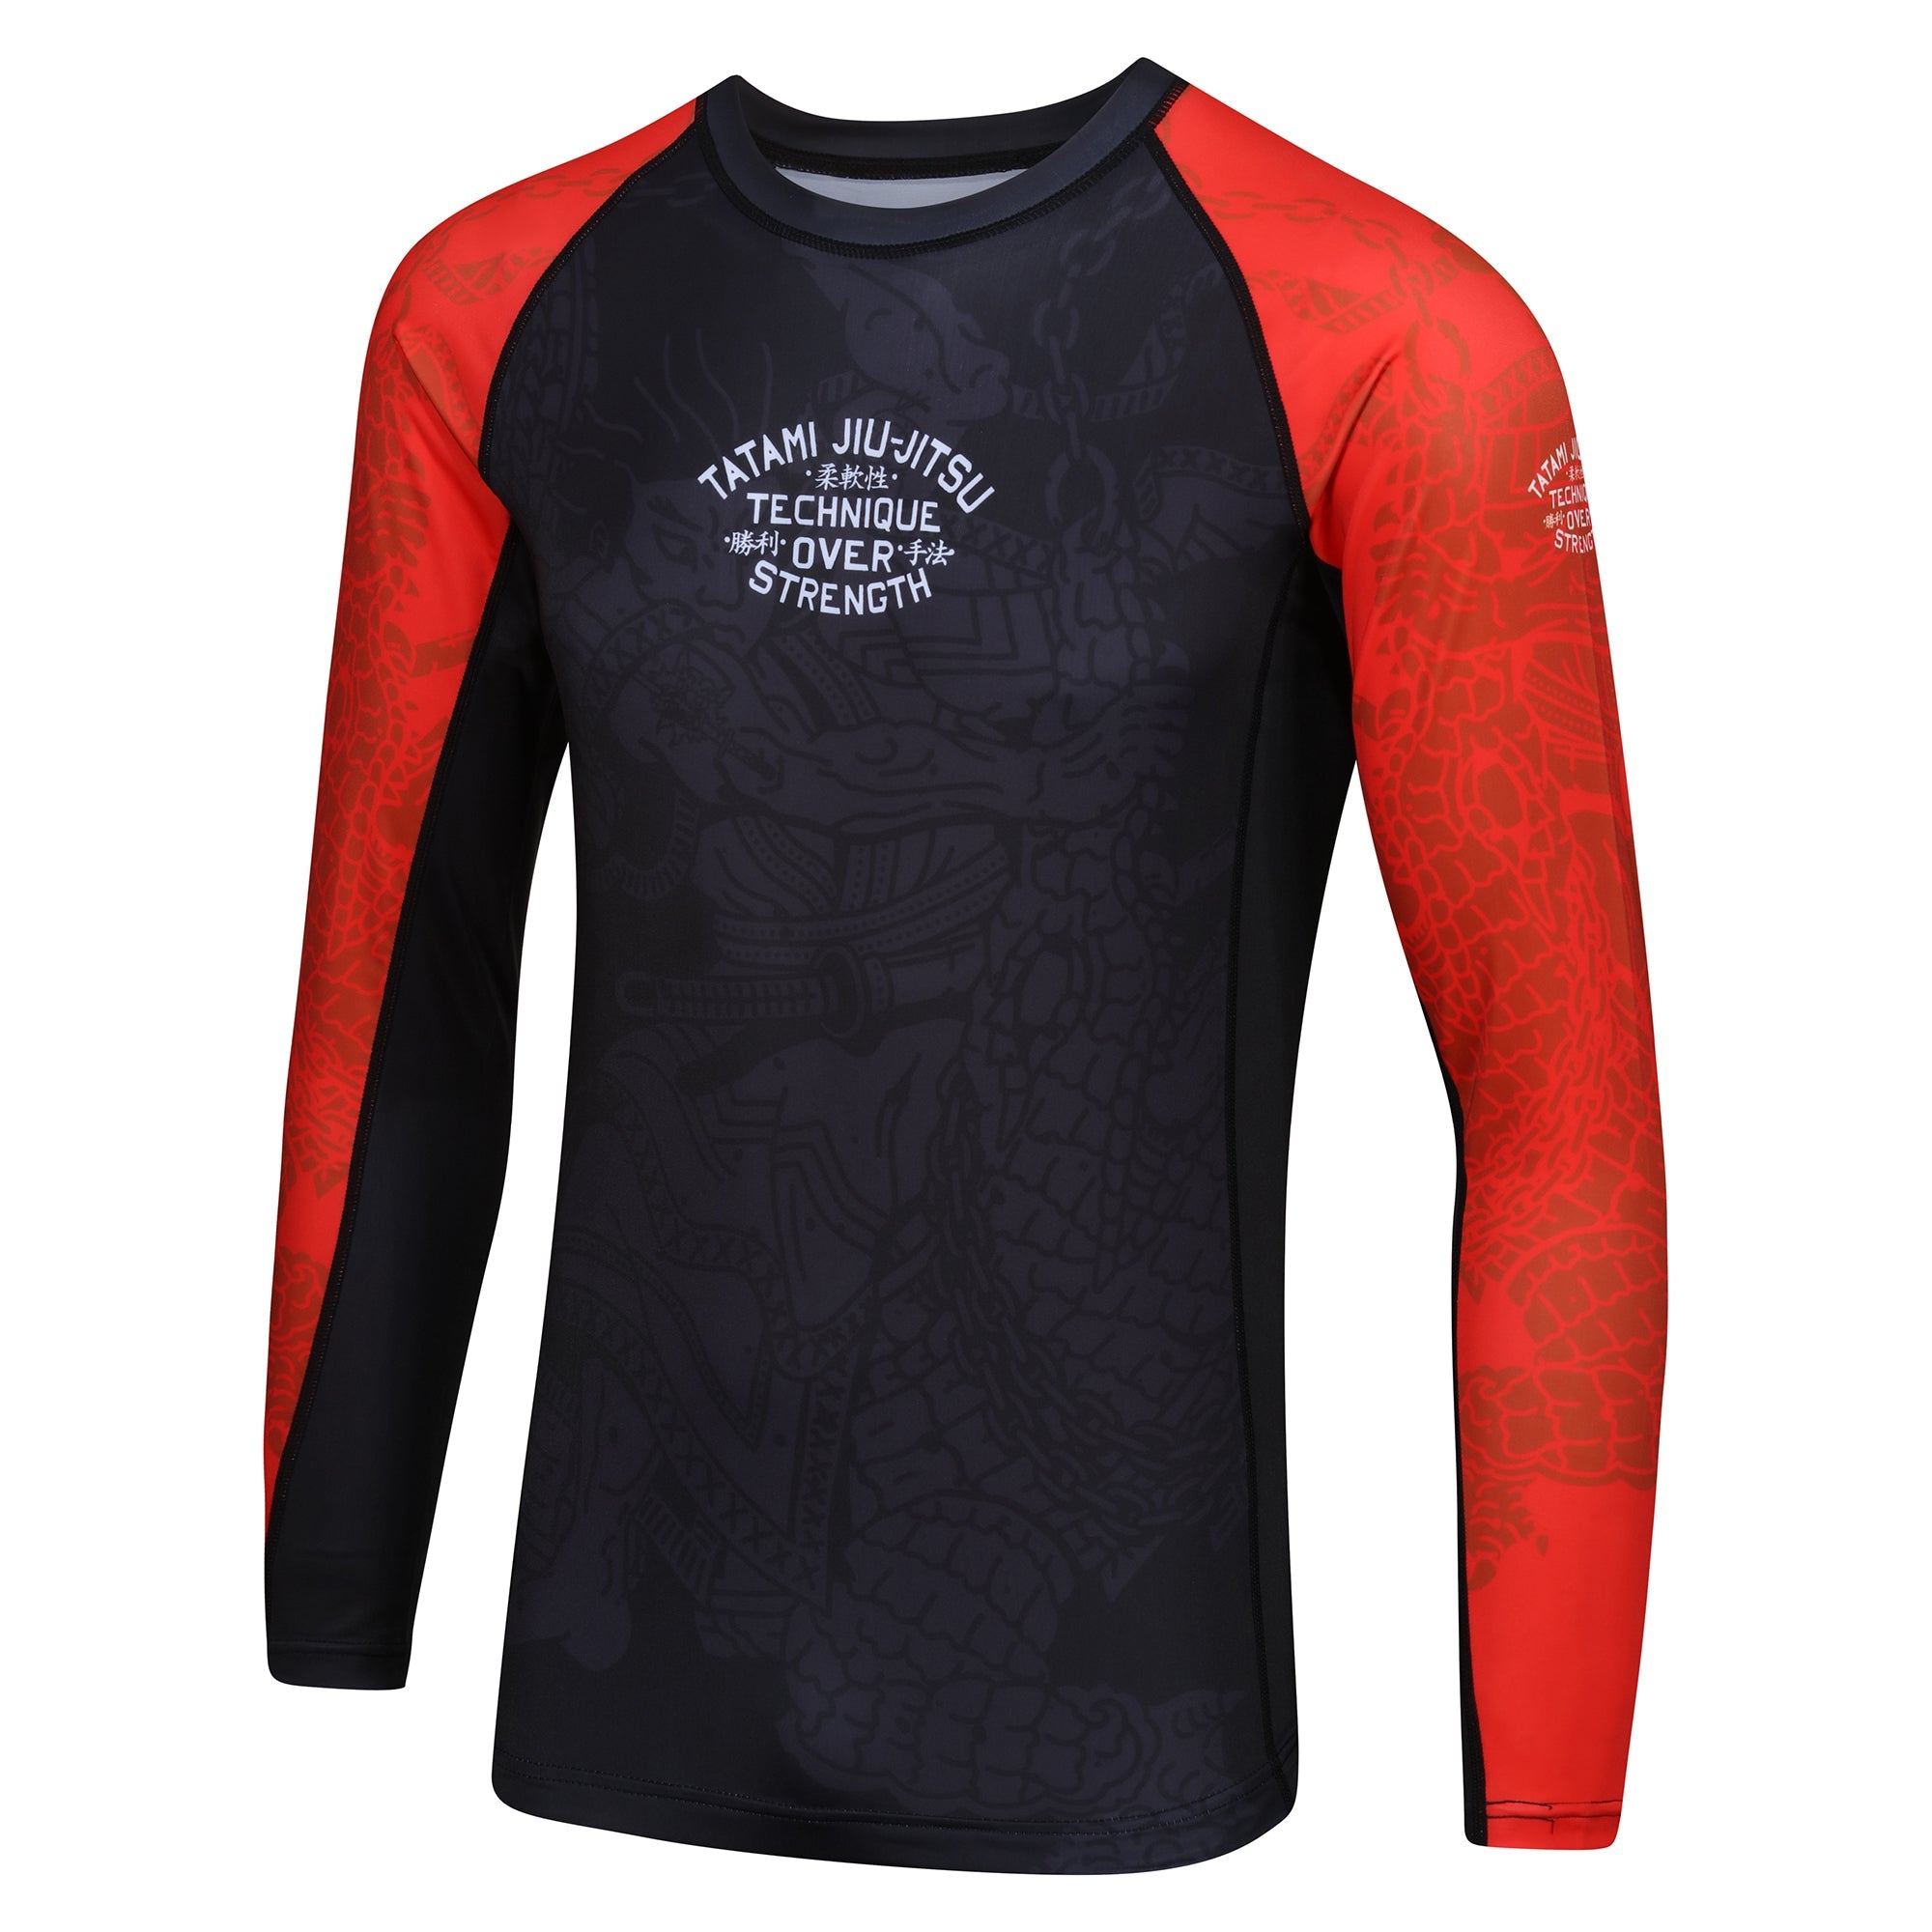 Technique Eco Tech Recycled Long Sleeve Rash Guard - Red